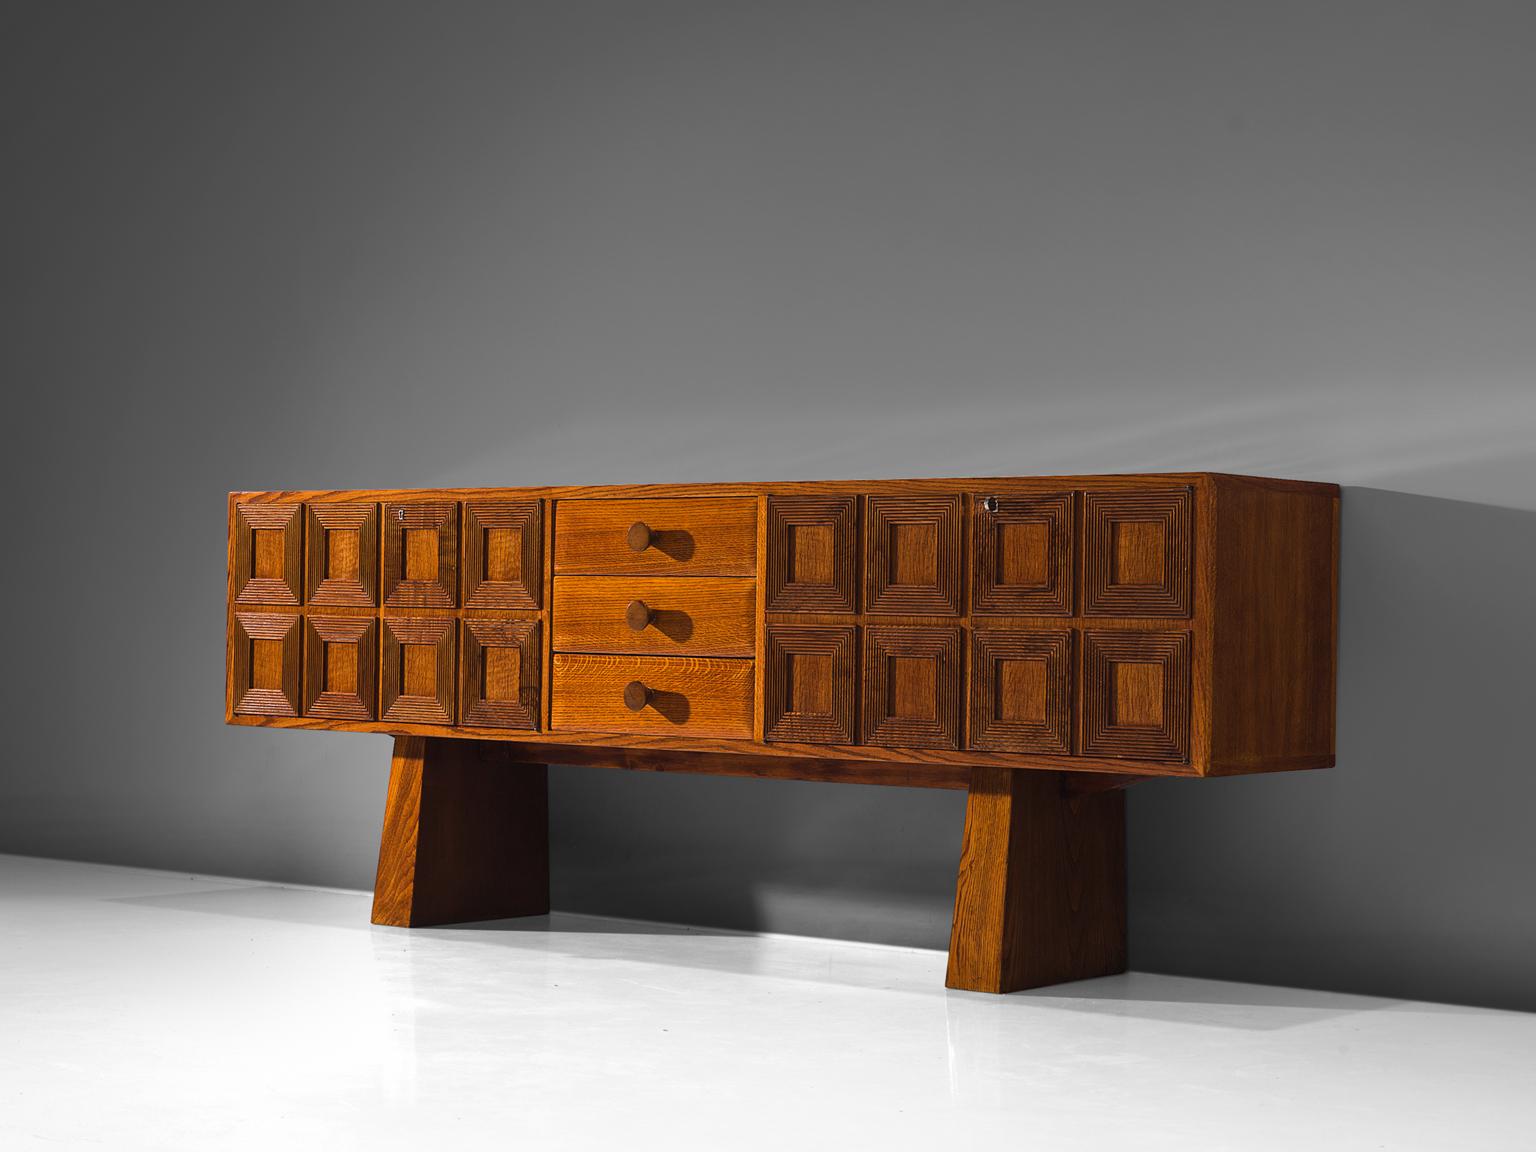 Sideboard, oak, Italy, 1940s.

Delicate and playful Italian cabinet unit in the style of Paolo Buffa on broad, trapezioid legs. The middle section holds three drawers. The piece is robust and features a geometric pattern on the left and right